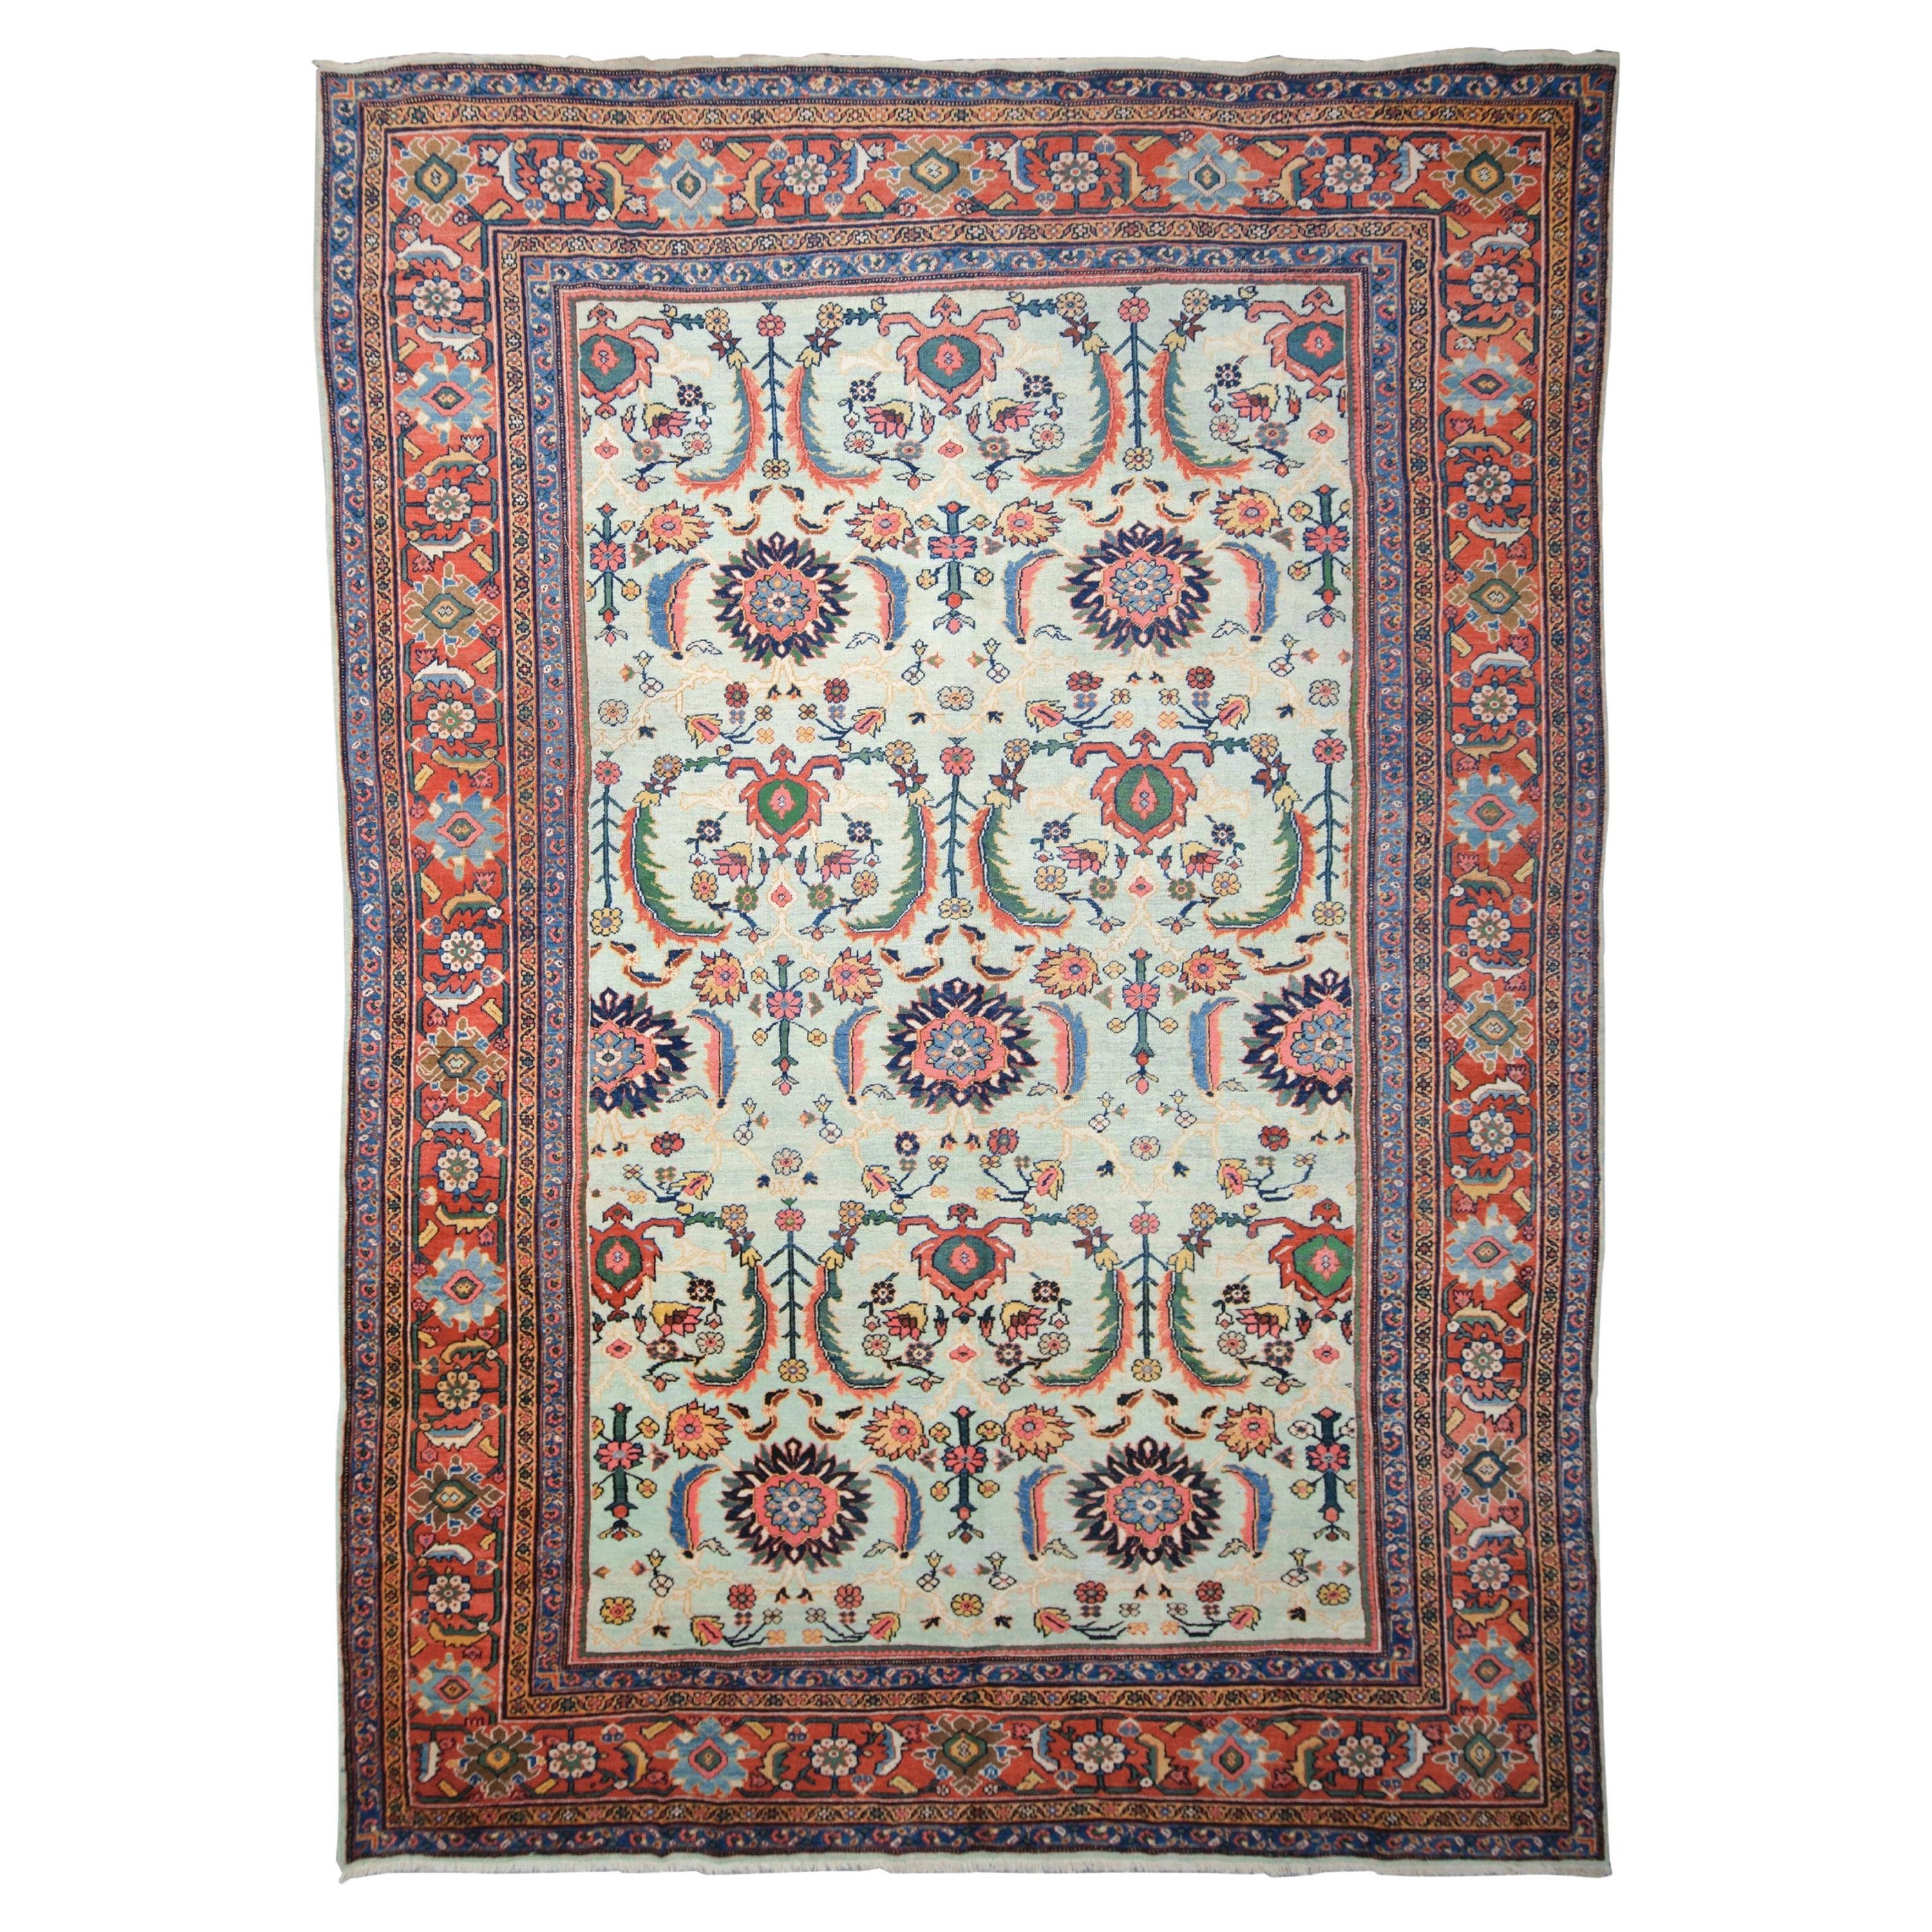 Antique Mahal Rug - Late of 19th Century Mahal Rug, Antique Rug, Vintage Rug For Sale